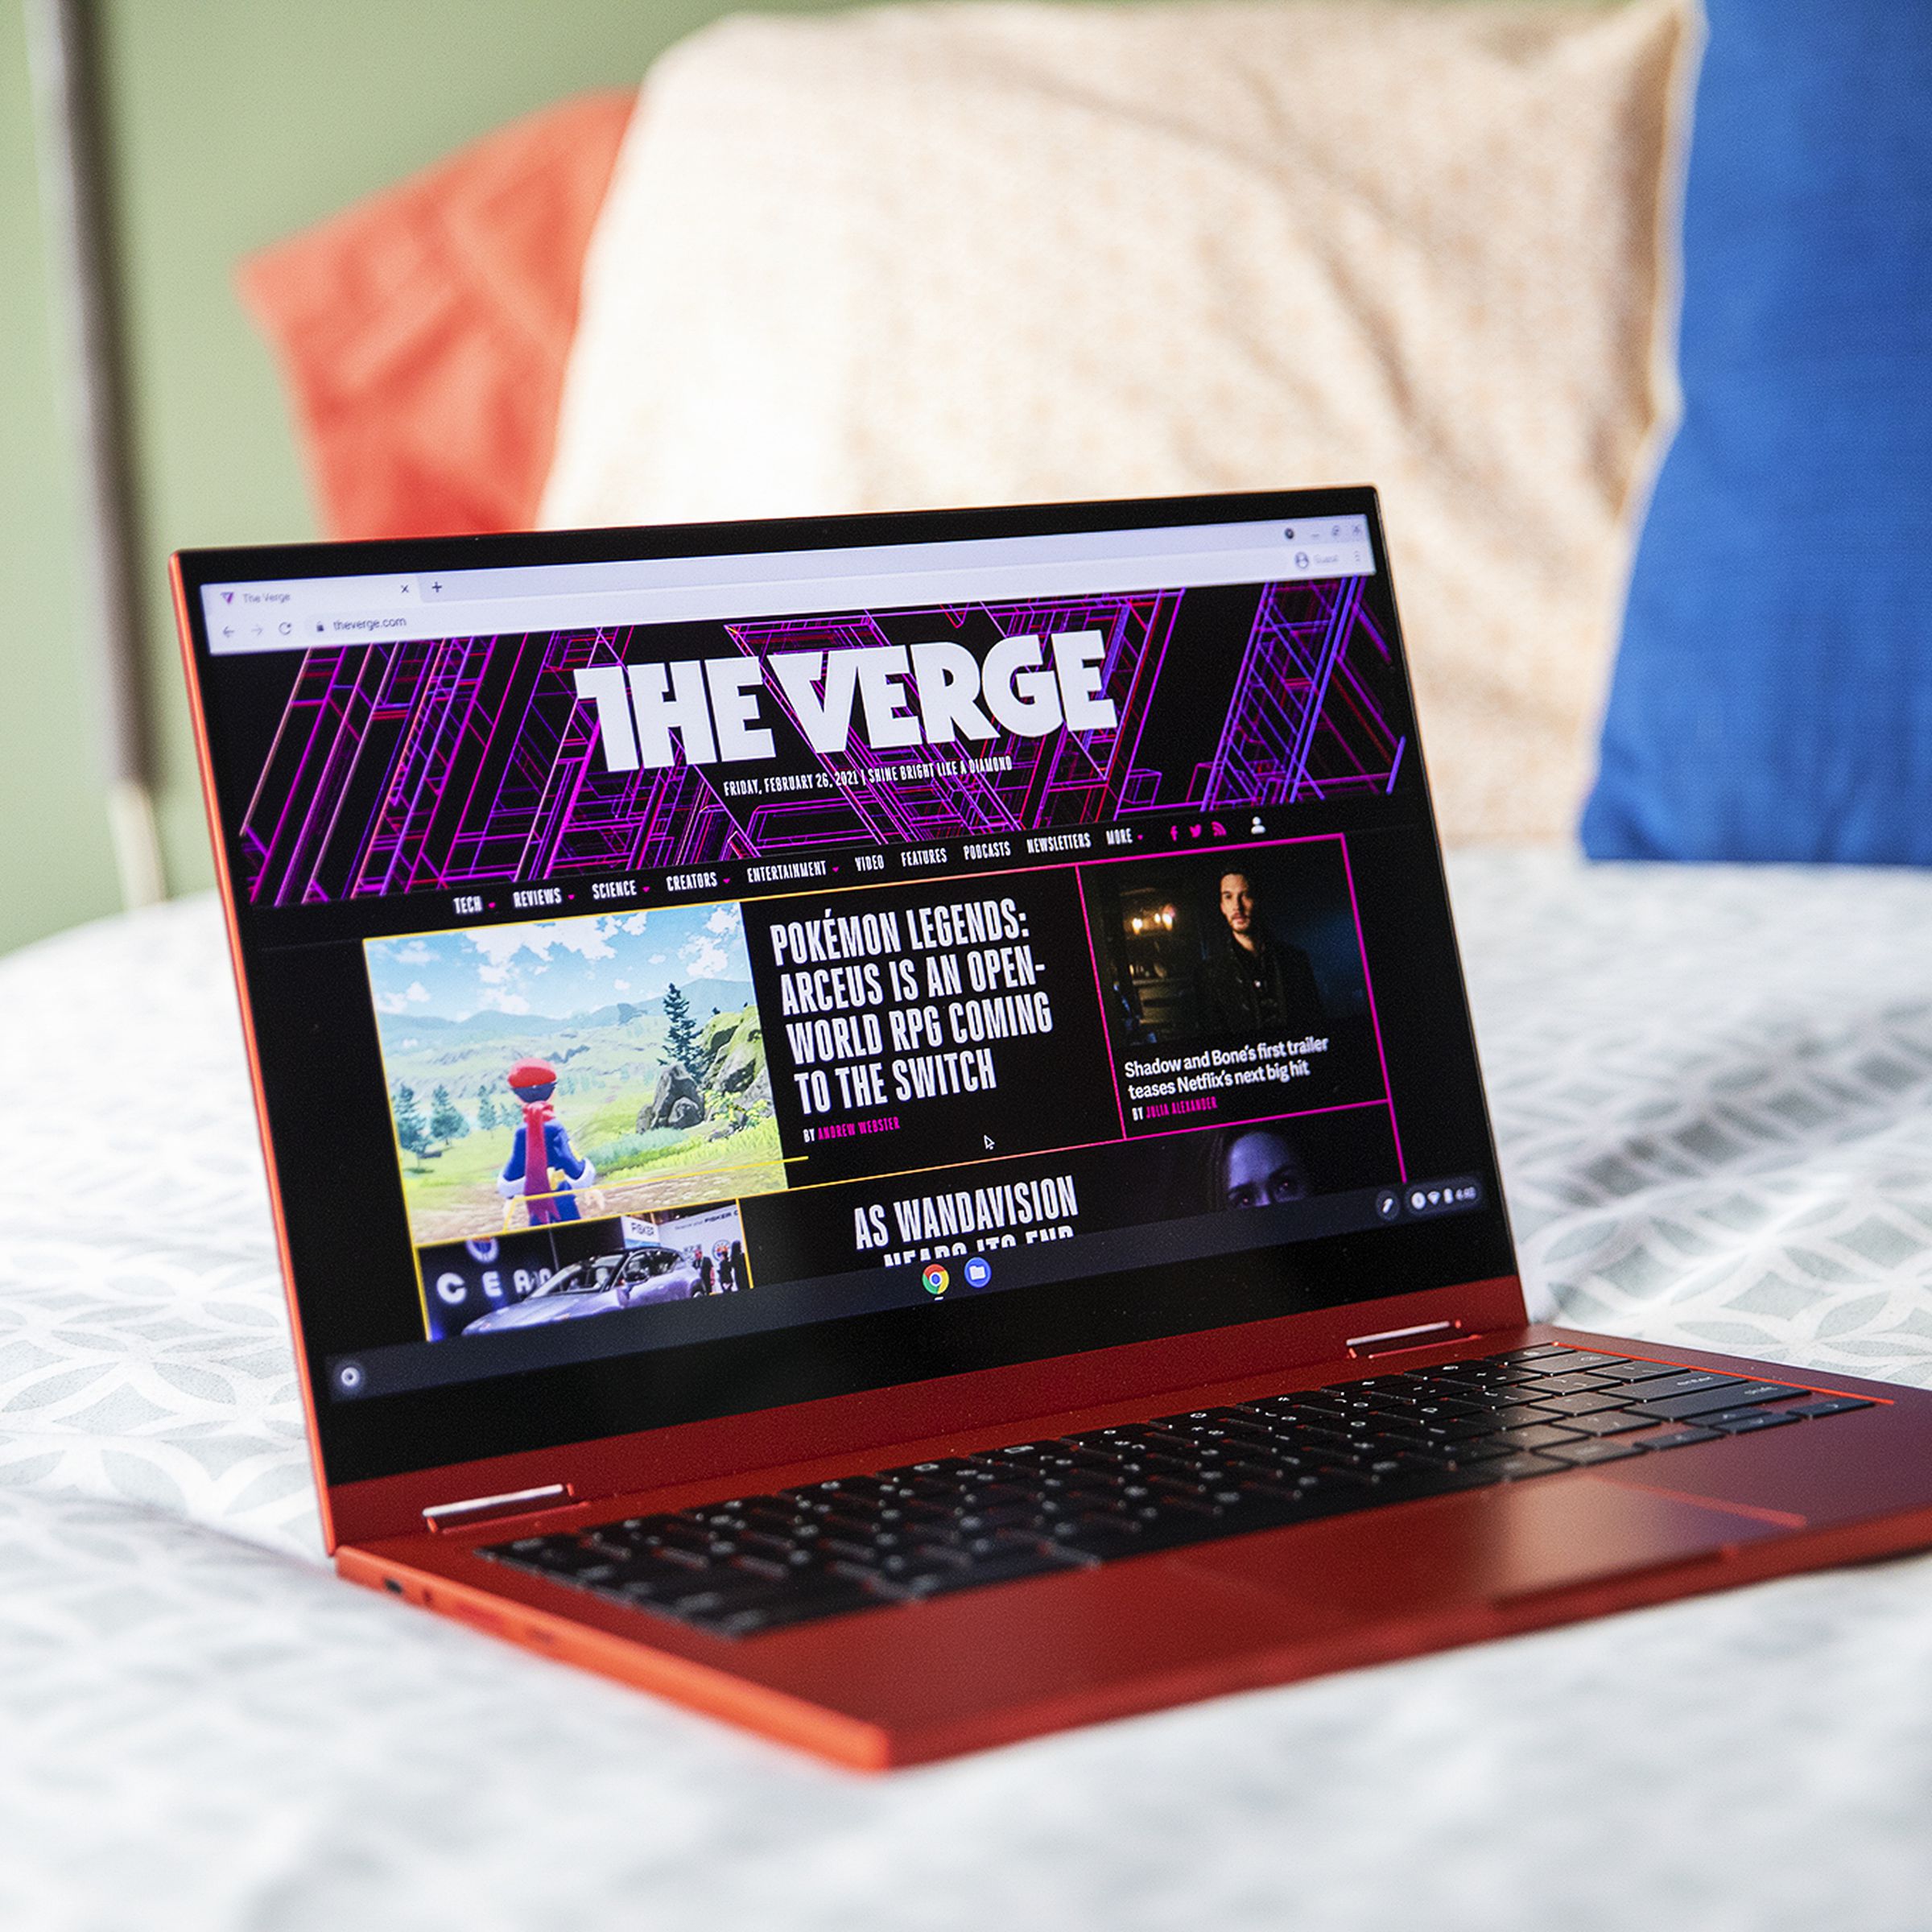 The Samsung Galaxy Chromebook open, angled slightly to the right on the corner of a bed. The screen displays Acutely homepage.